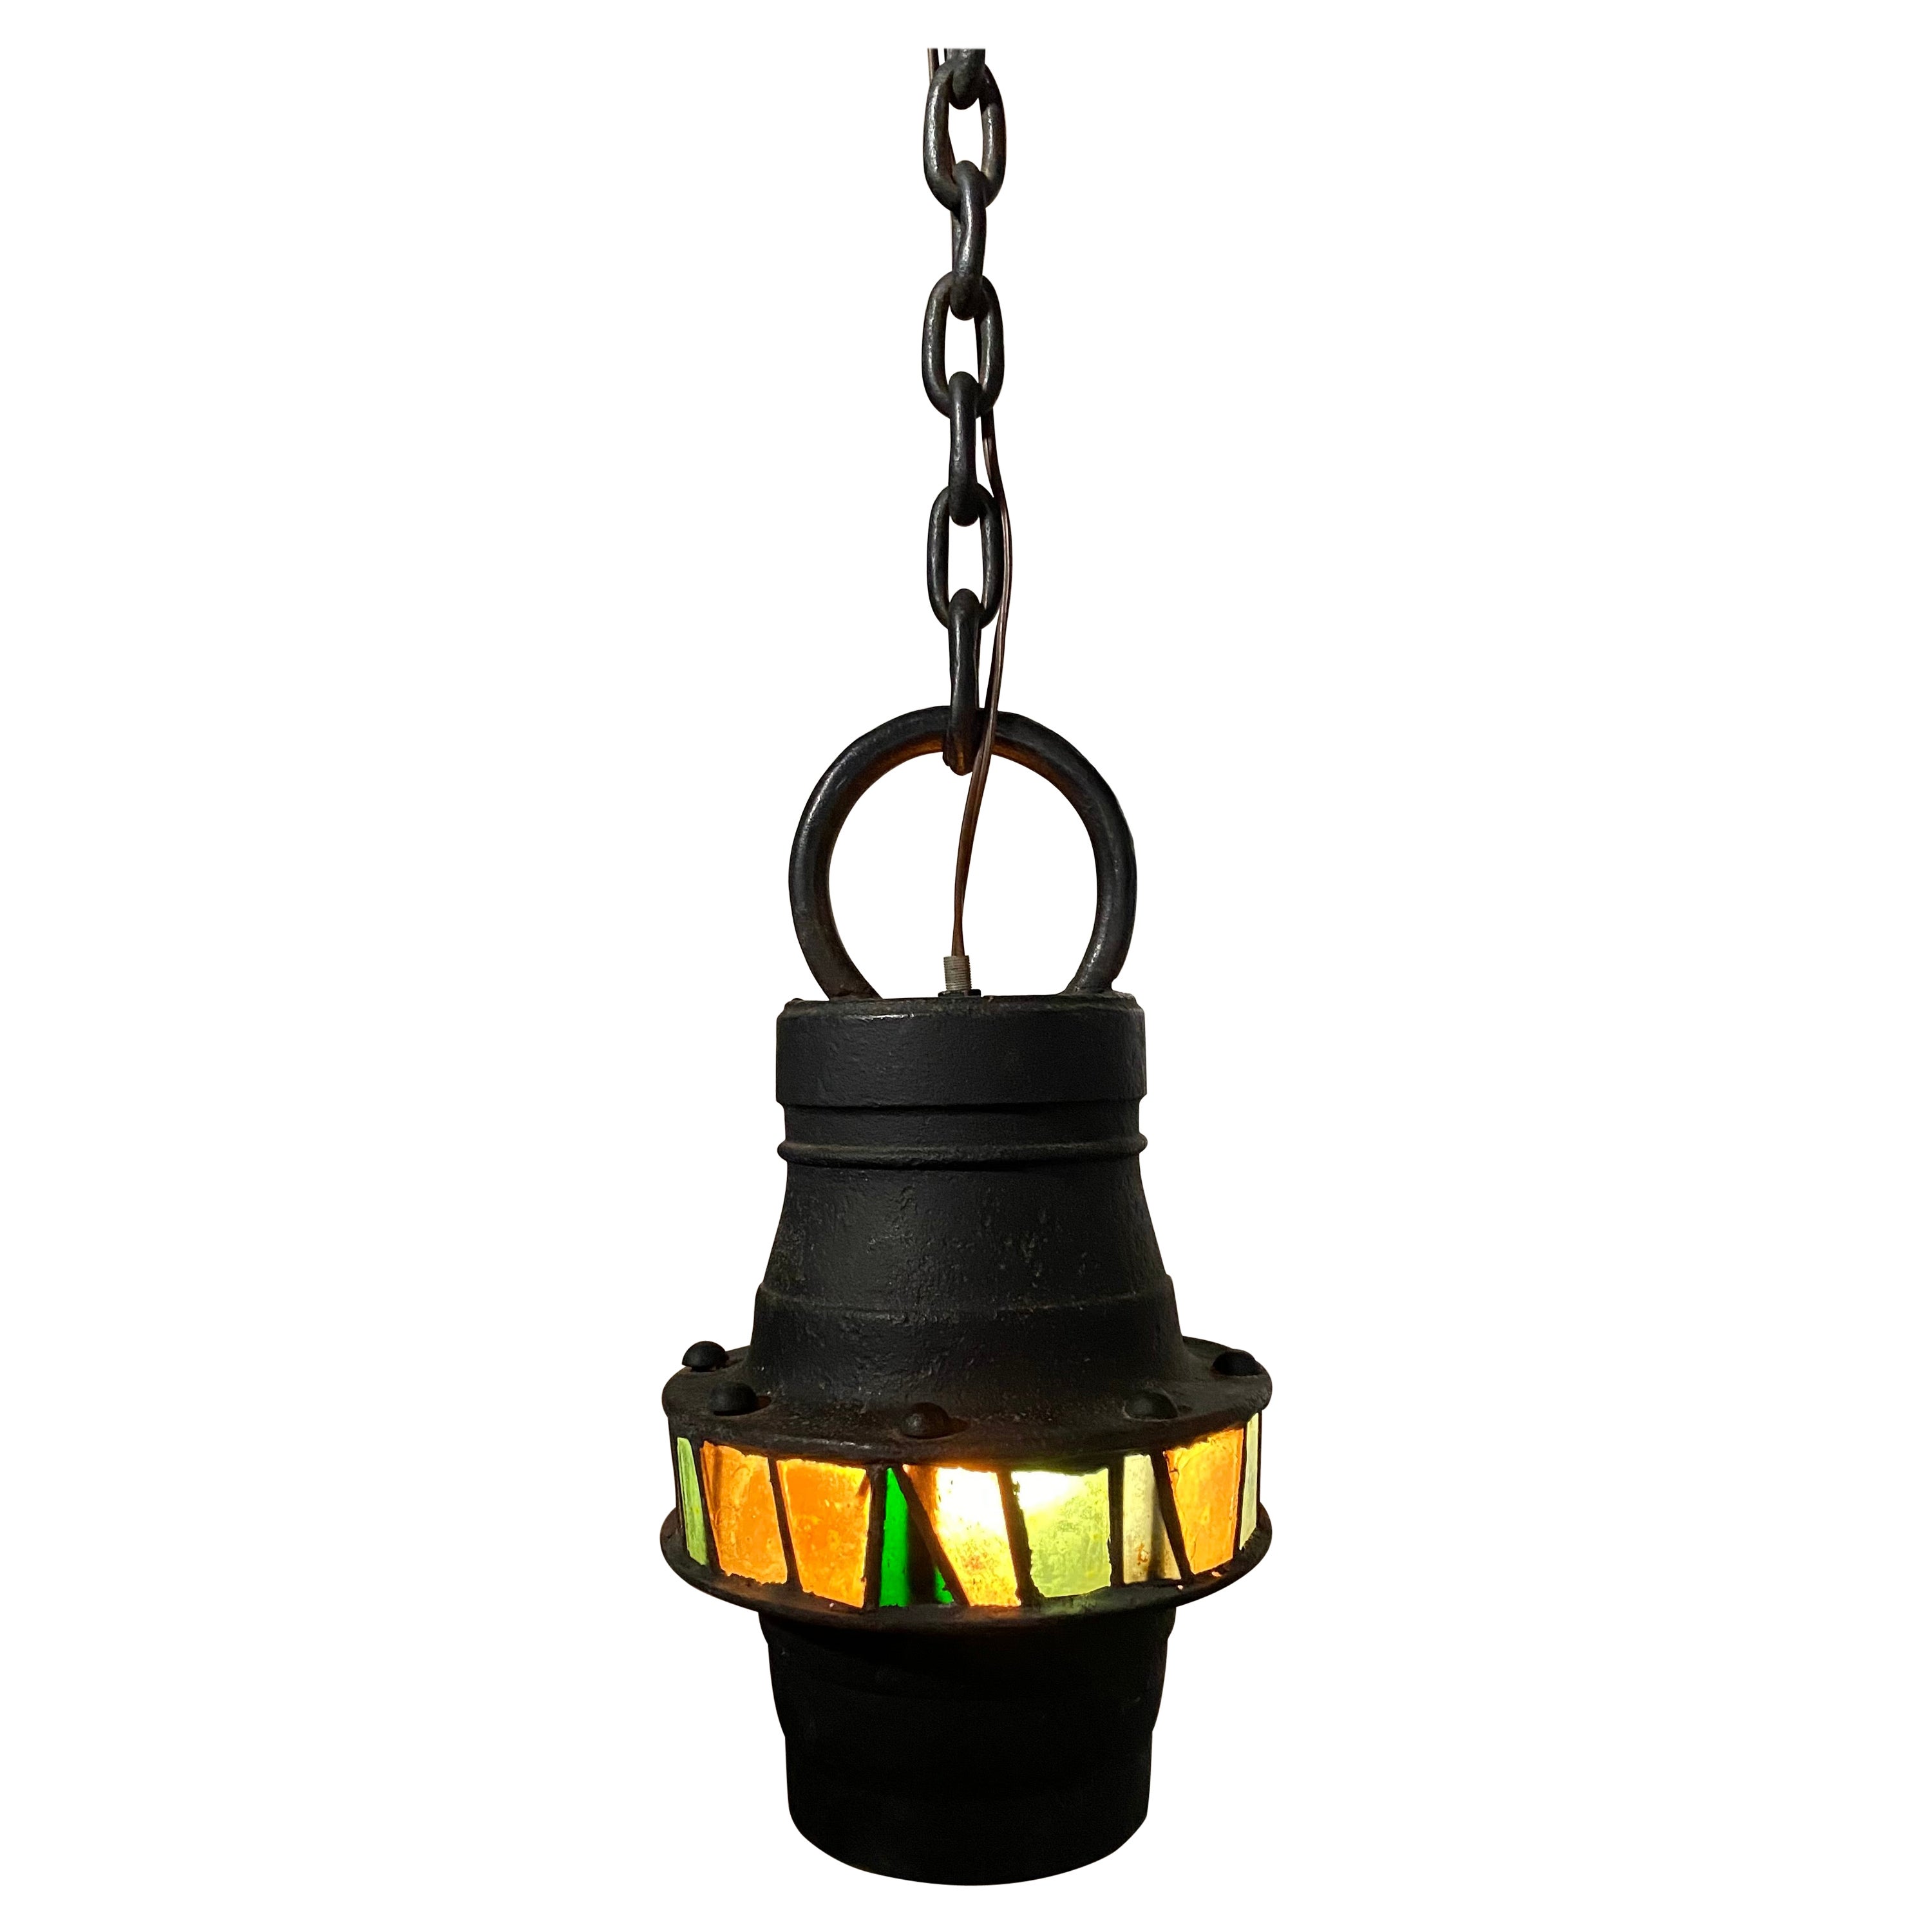 Brutalist Hand-Crafted Iron and stained Glass Hanging Pendant Lamp, c. 1960's For Sale